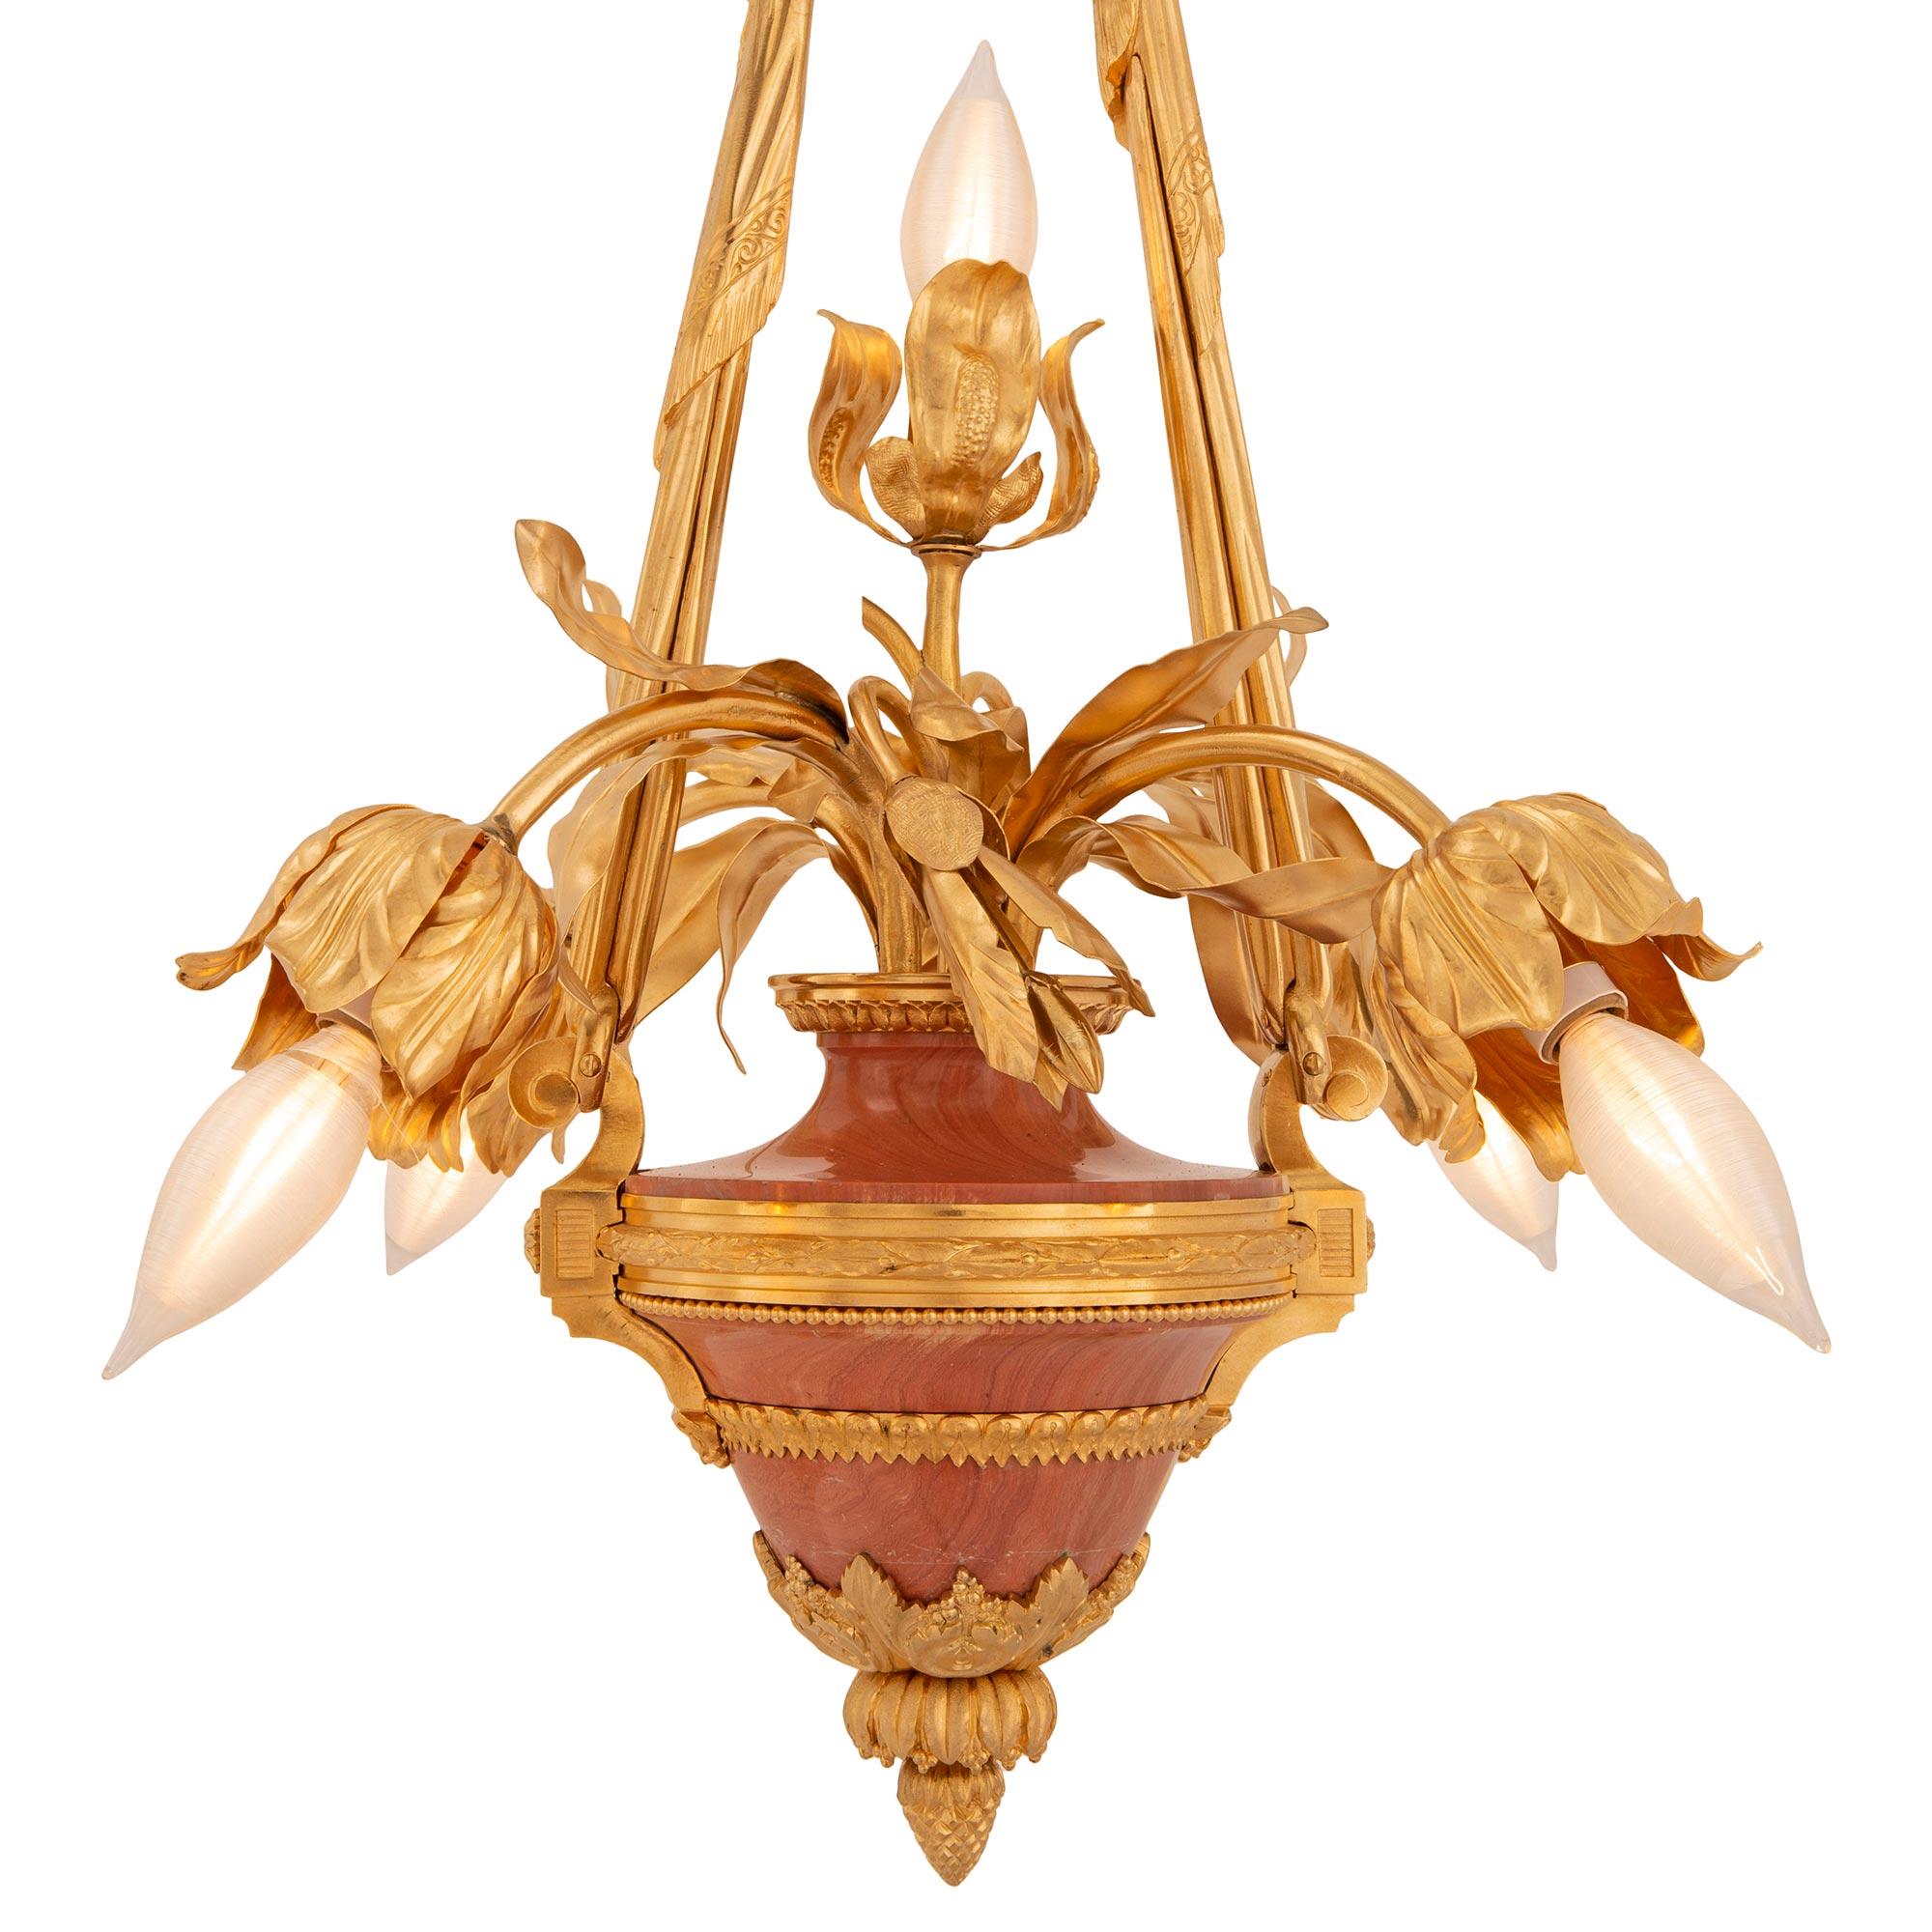 French 19th Century Louis XVI Belle Époque Period Ormolu And Marble Chandelier For Sale 2